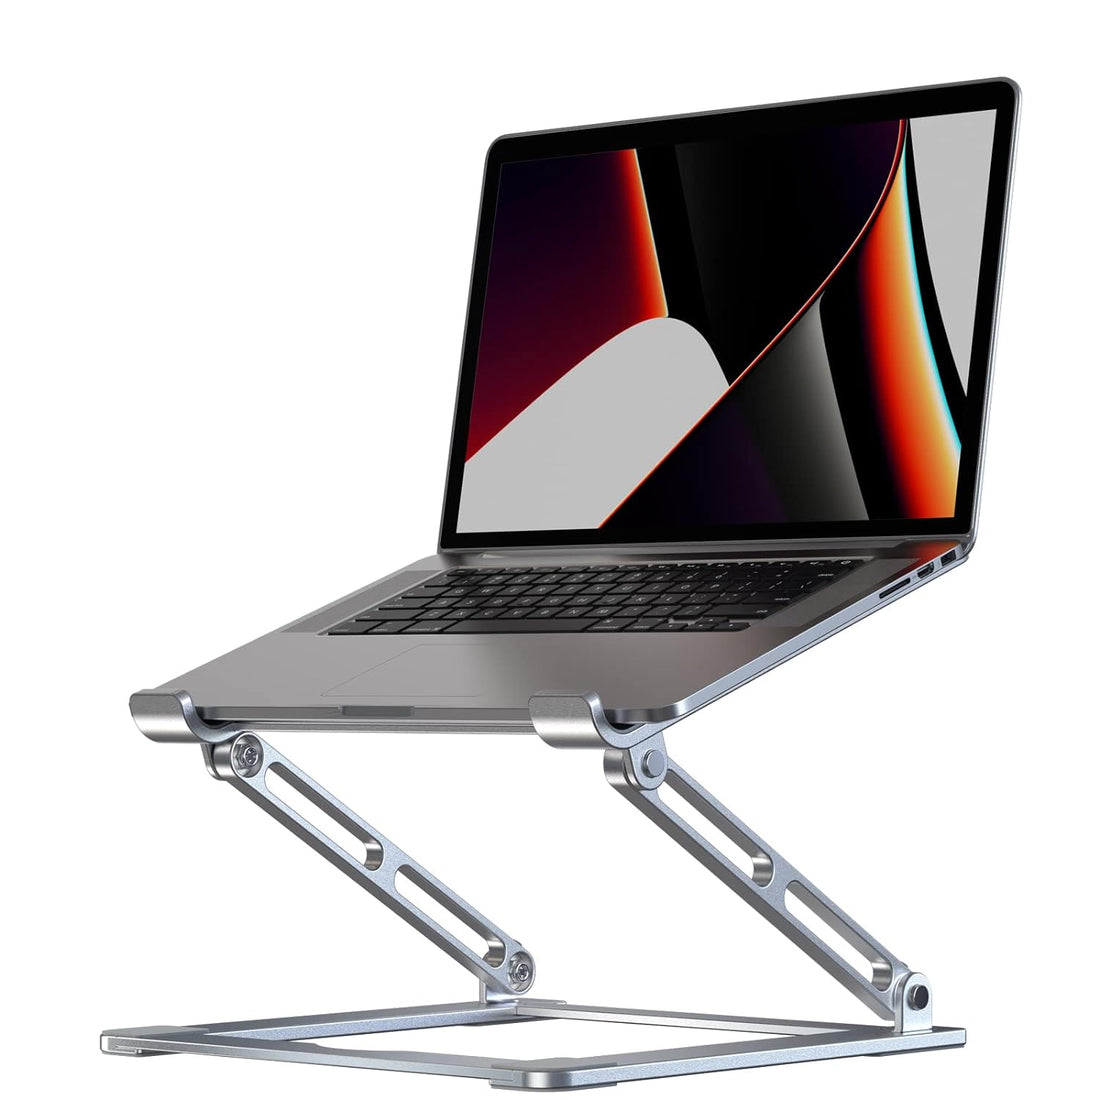 Laptop Stand for Desk, Adjustable Laptop Stand Holder Portable Laptop Riser with Multi-Angle Height Adjustable Computer Stand for MacBook Air/Pro and More Notebooks 10-17.3"-Silver